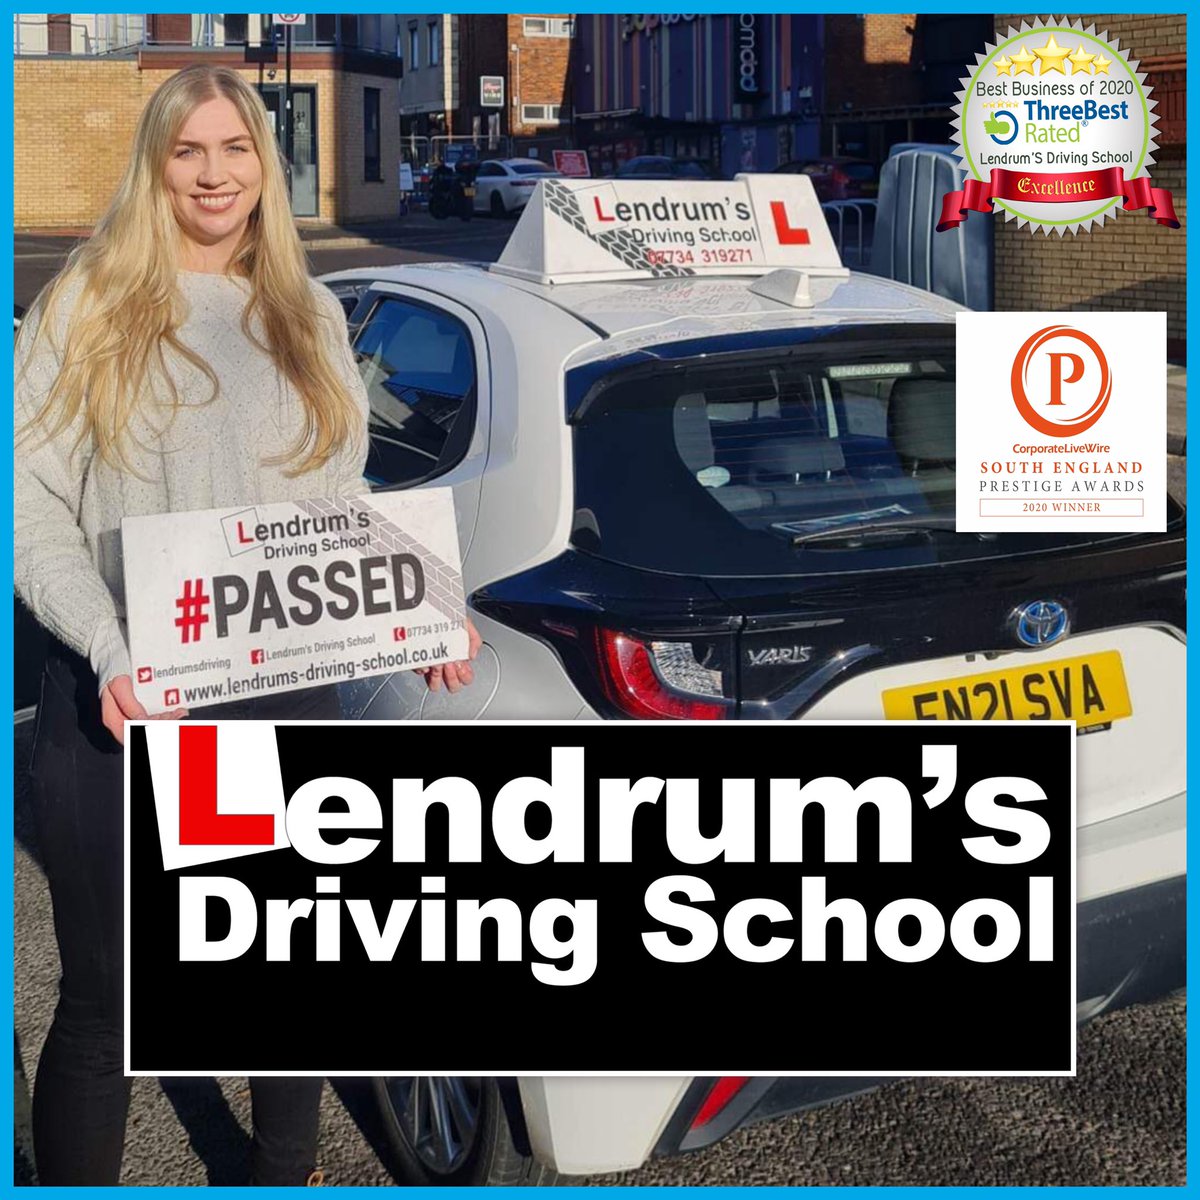 Congratulations to Ella for #passing her #drivingtest at #Southampton with #drivinginstructor Lisa